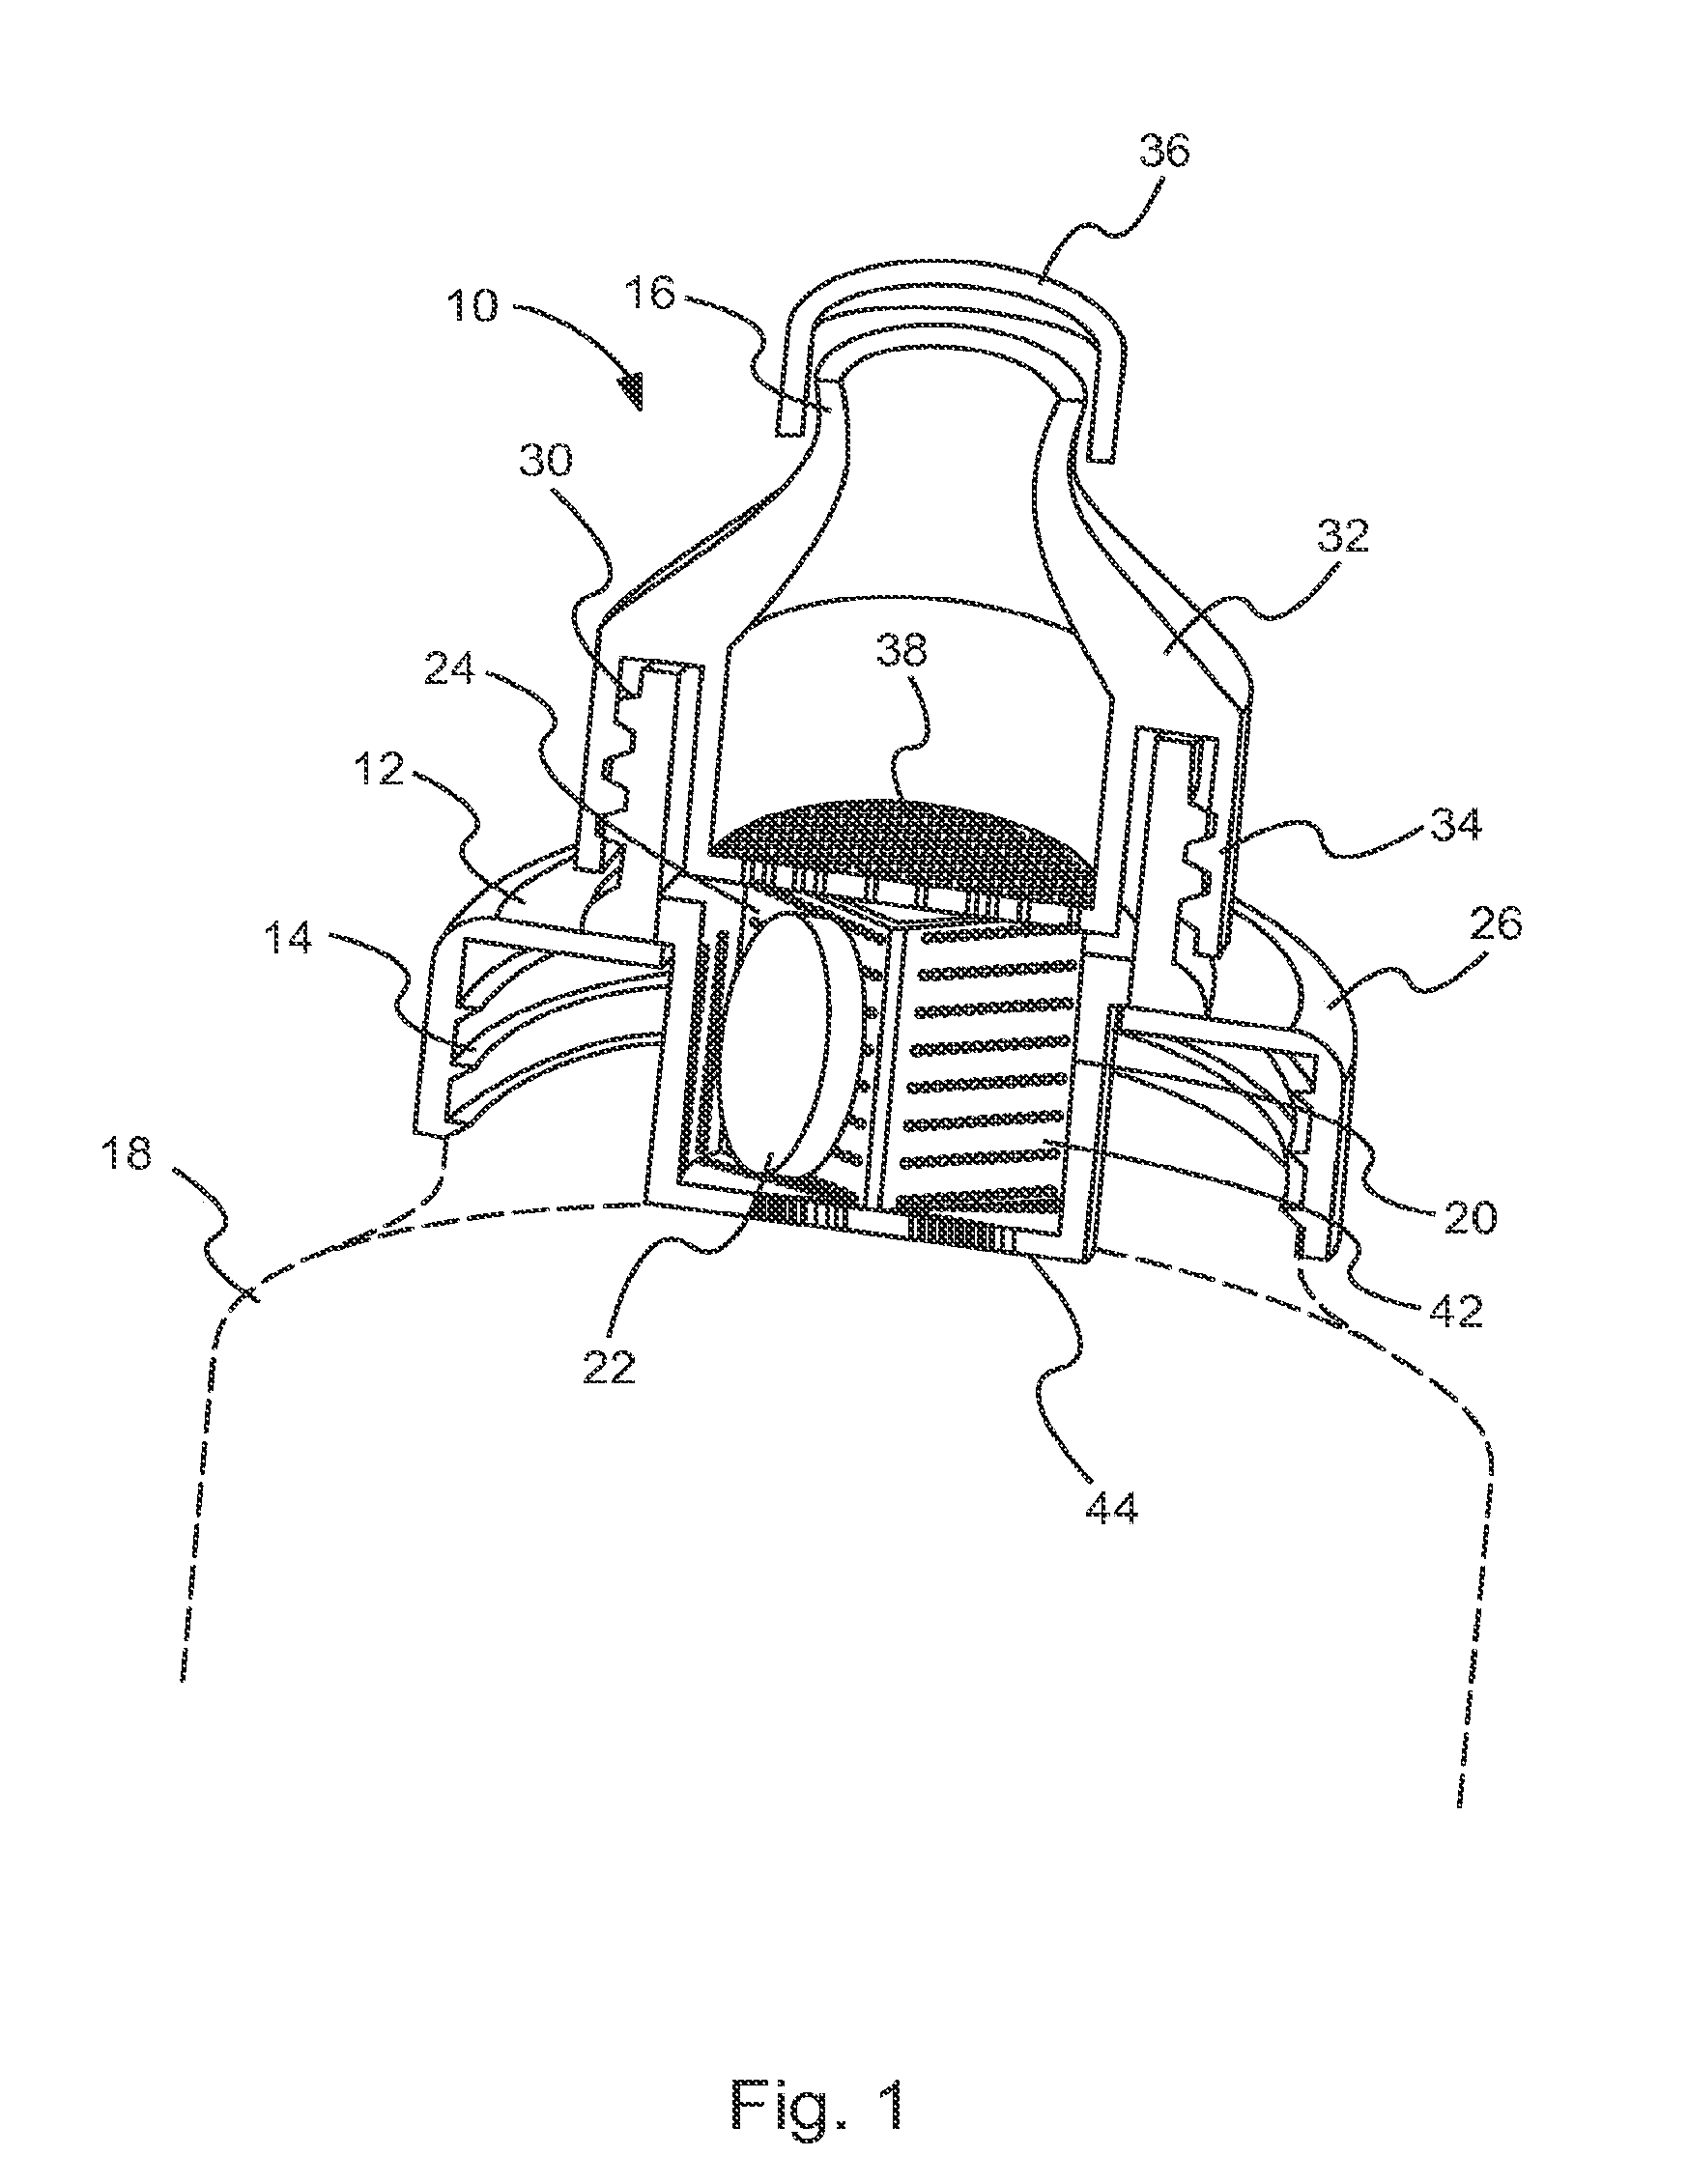 Water container cap for holding additives to water